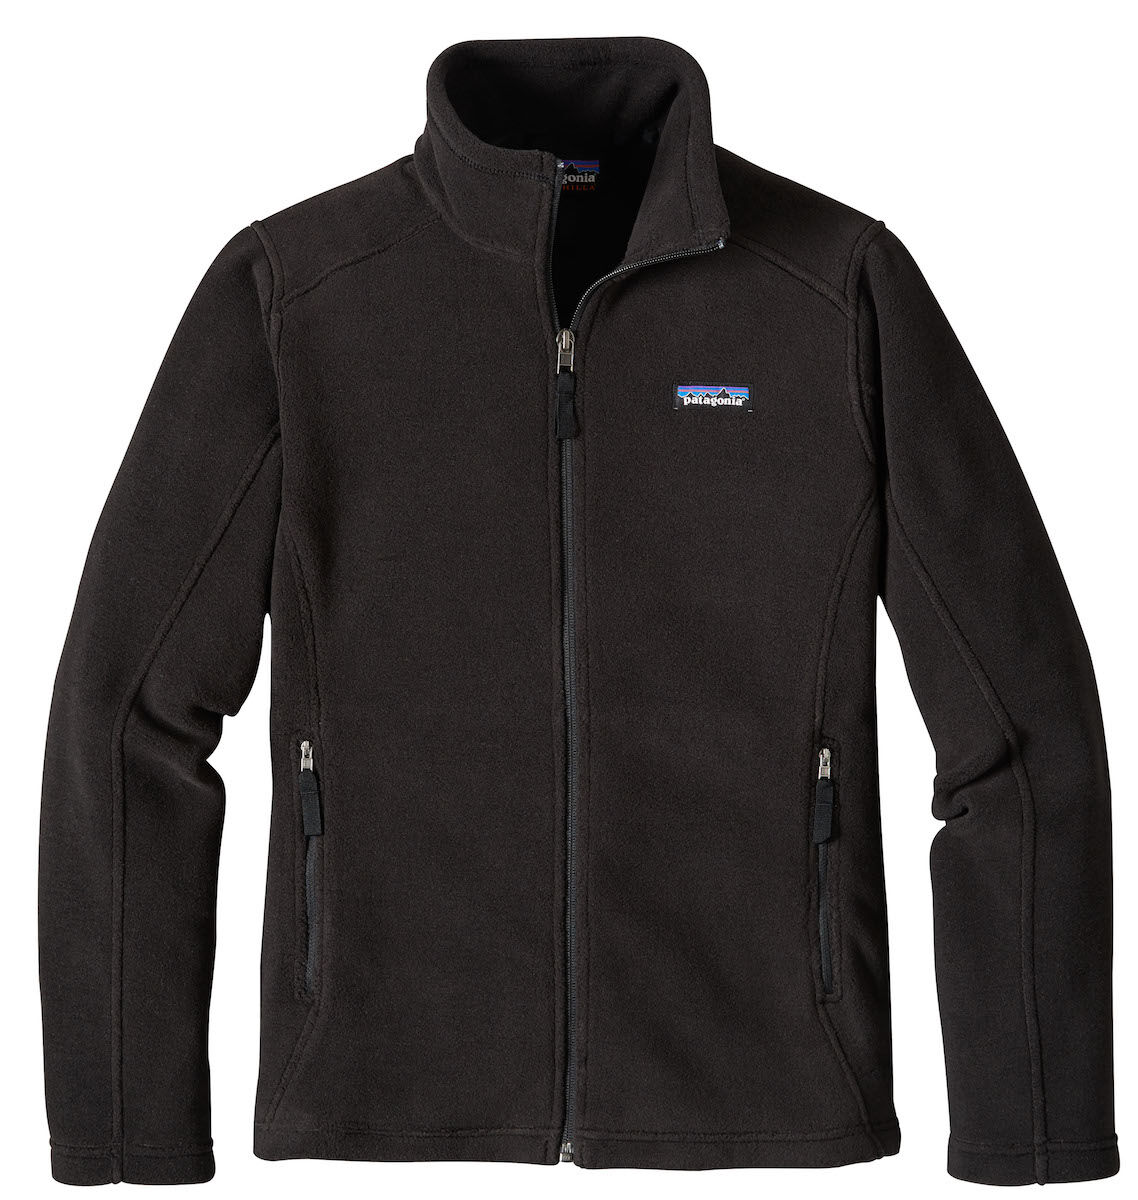 Patagonia - Classic Synchilla® Fleece Jacket - Giacca in pile - Donna